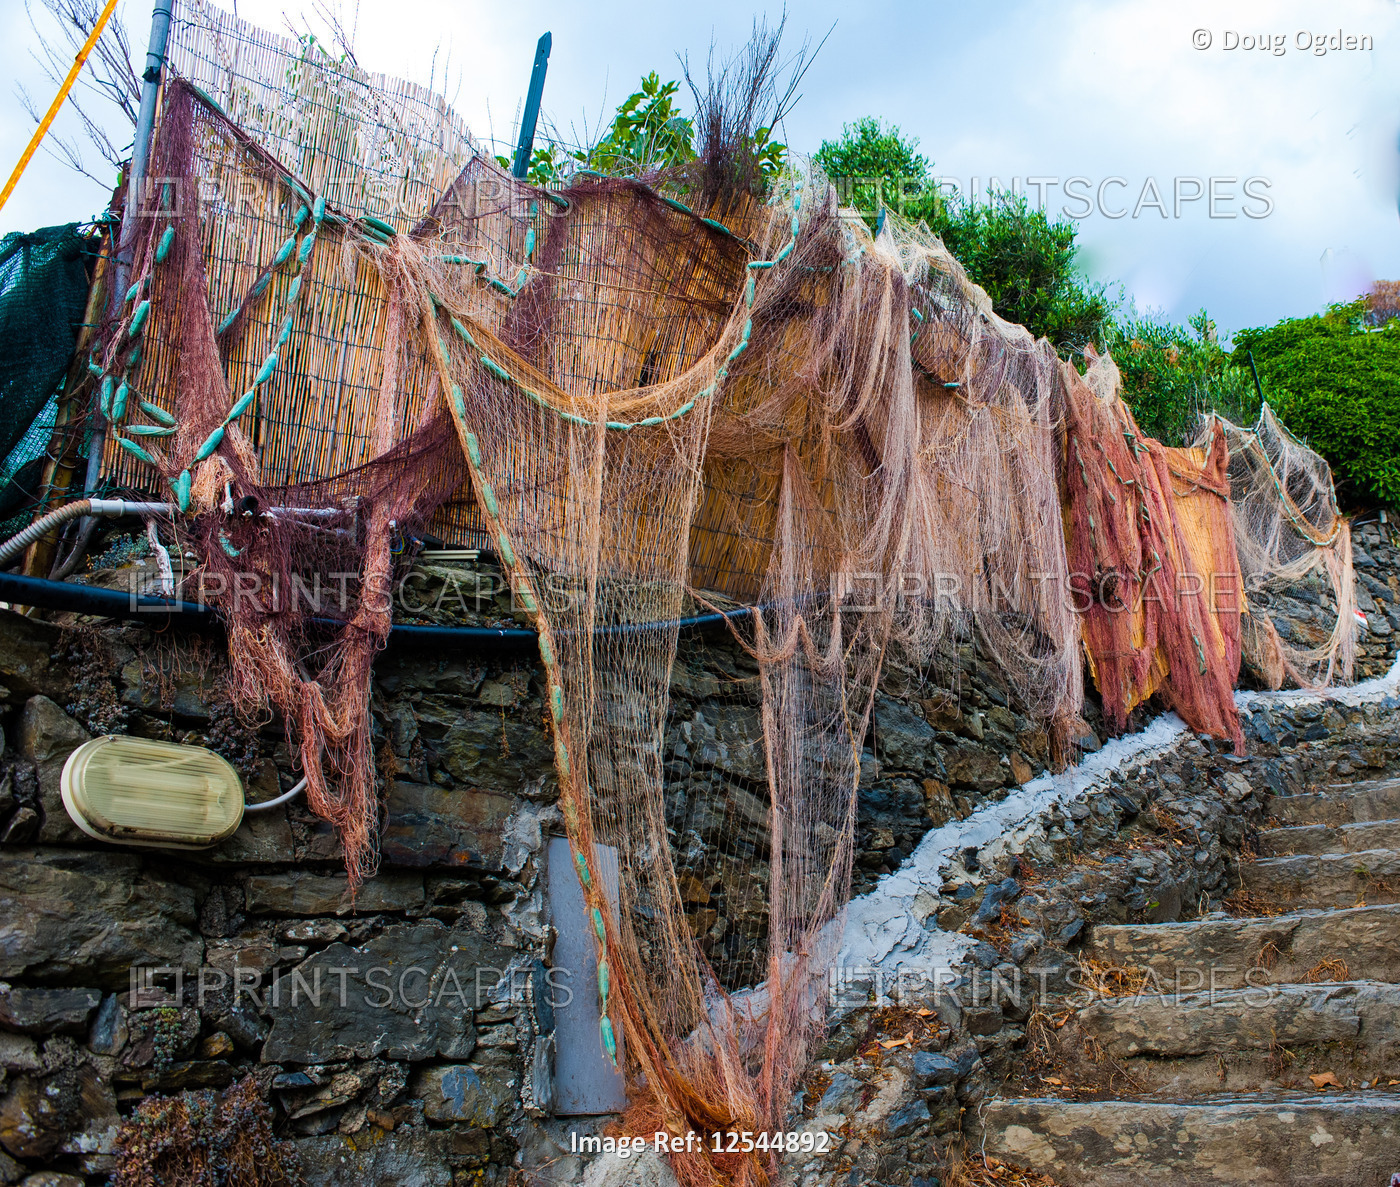 An old fishing net hung along the Cinqua Terra Trail in Italy